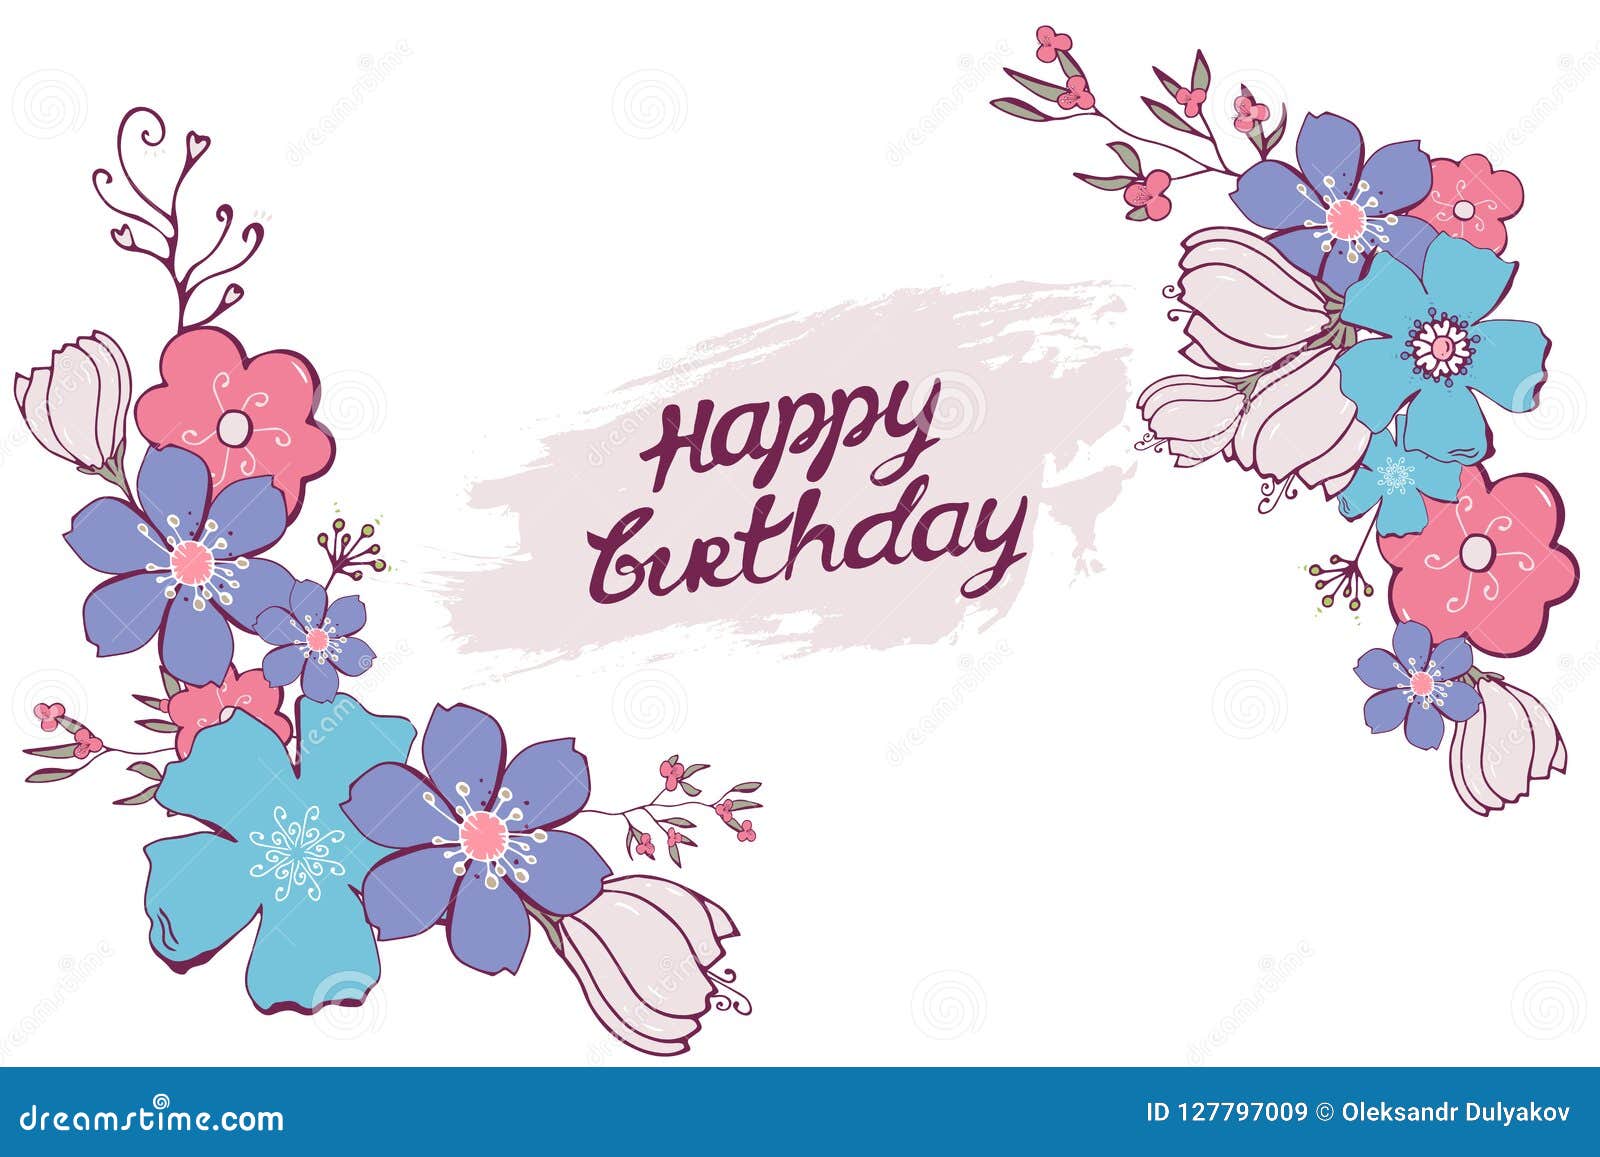 Summer Vintage Floral Greeting Card With Blooming Flower And Garden Flowers Happy Birthday Card Botanical Natural Illustration On Stock Vector Illustration Of Greeting Blossom 127797009